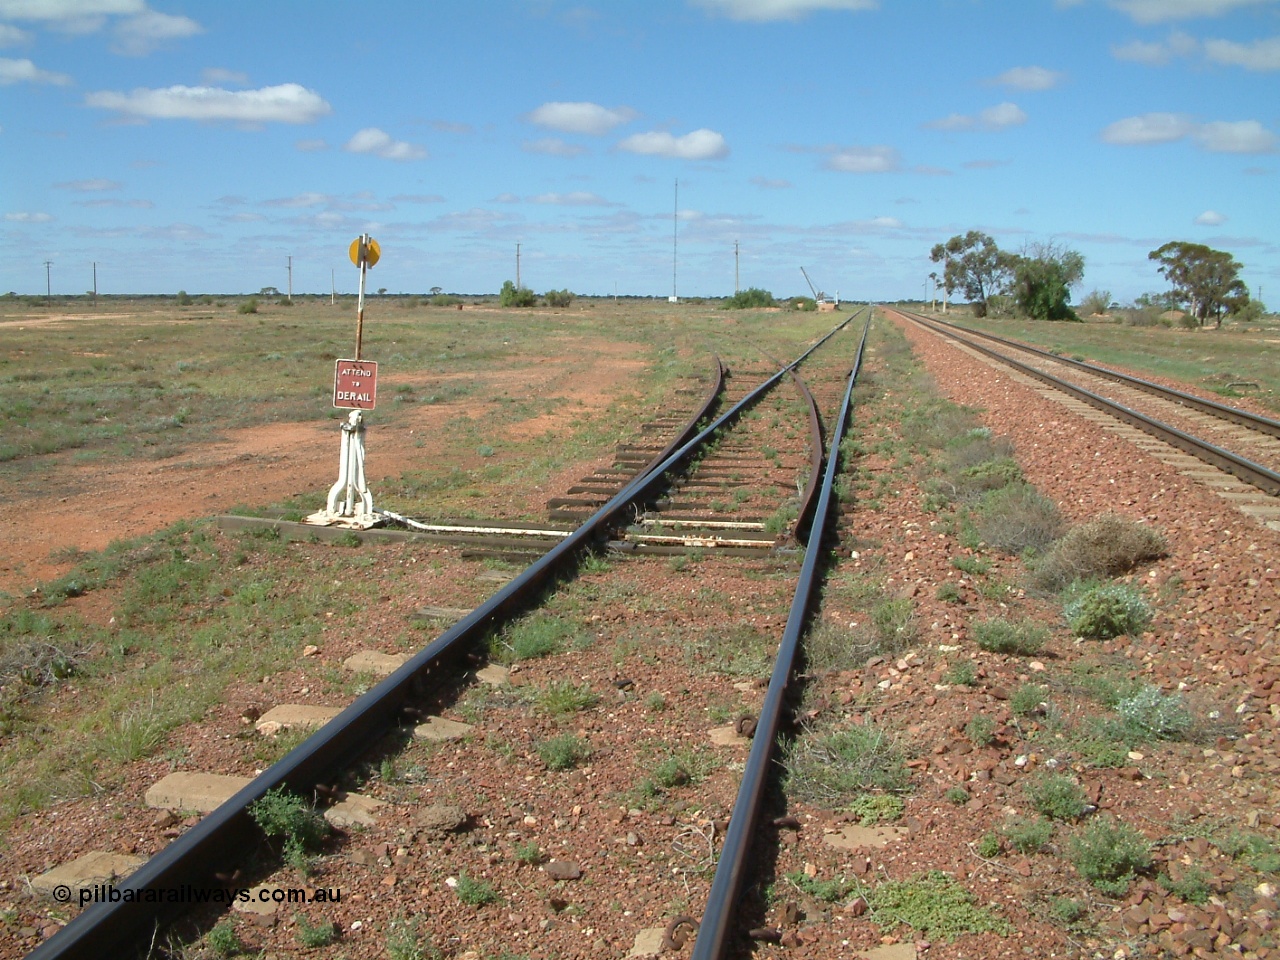 030415 140420
Kingoonya, located at the 426.5 km on the Trans Australian Railway, looking east along the loop siding with the mainline on the right and points and sidings off to the left, loading ramp and crane in distance, town located to the right. [url=https://goo.gl/maps/rY8C9mU9iF4tBmjF7]GeoData location[/url].
